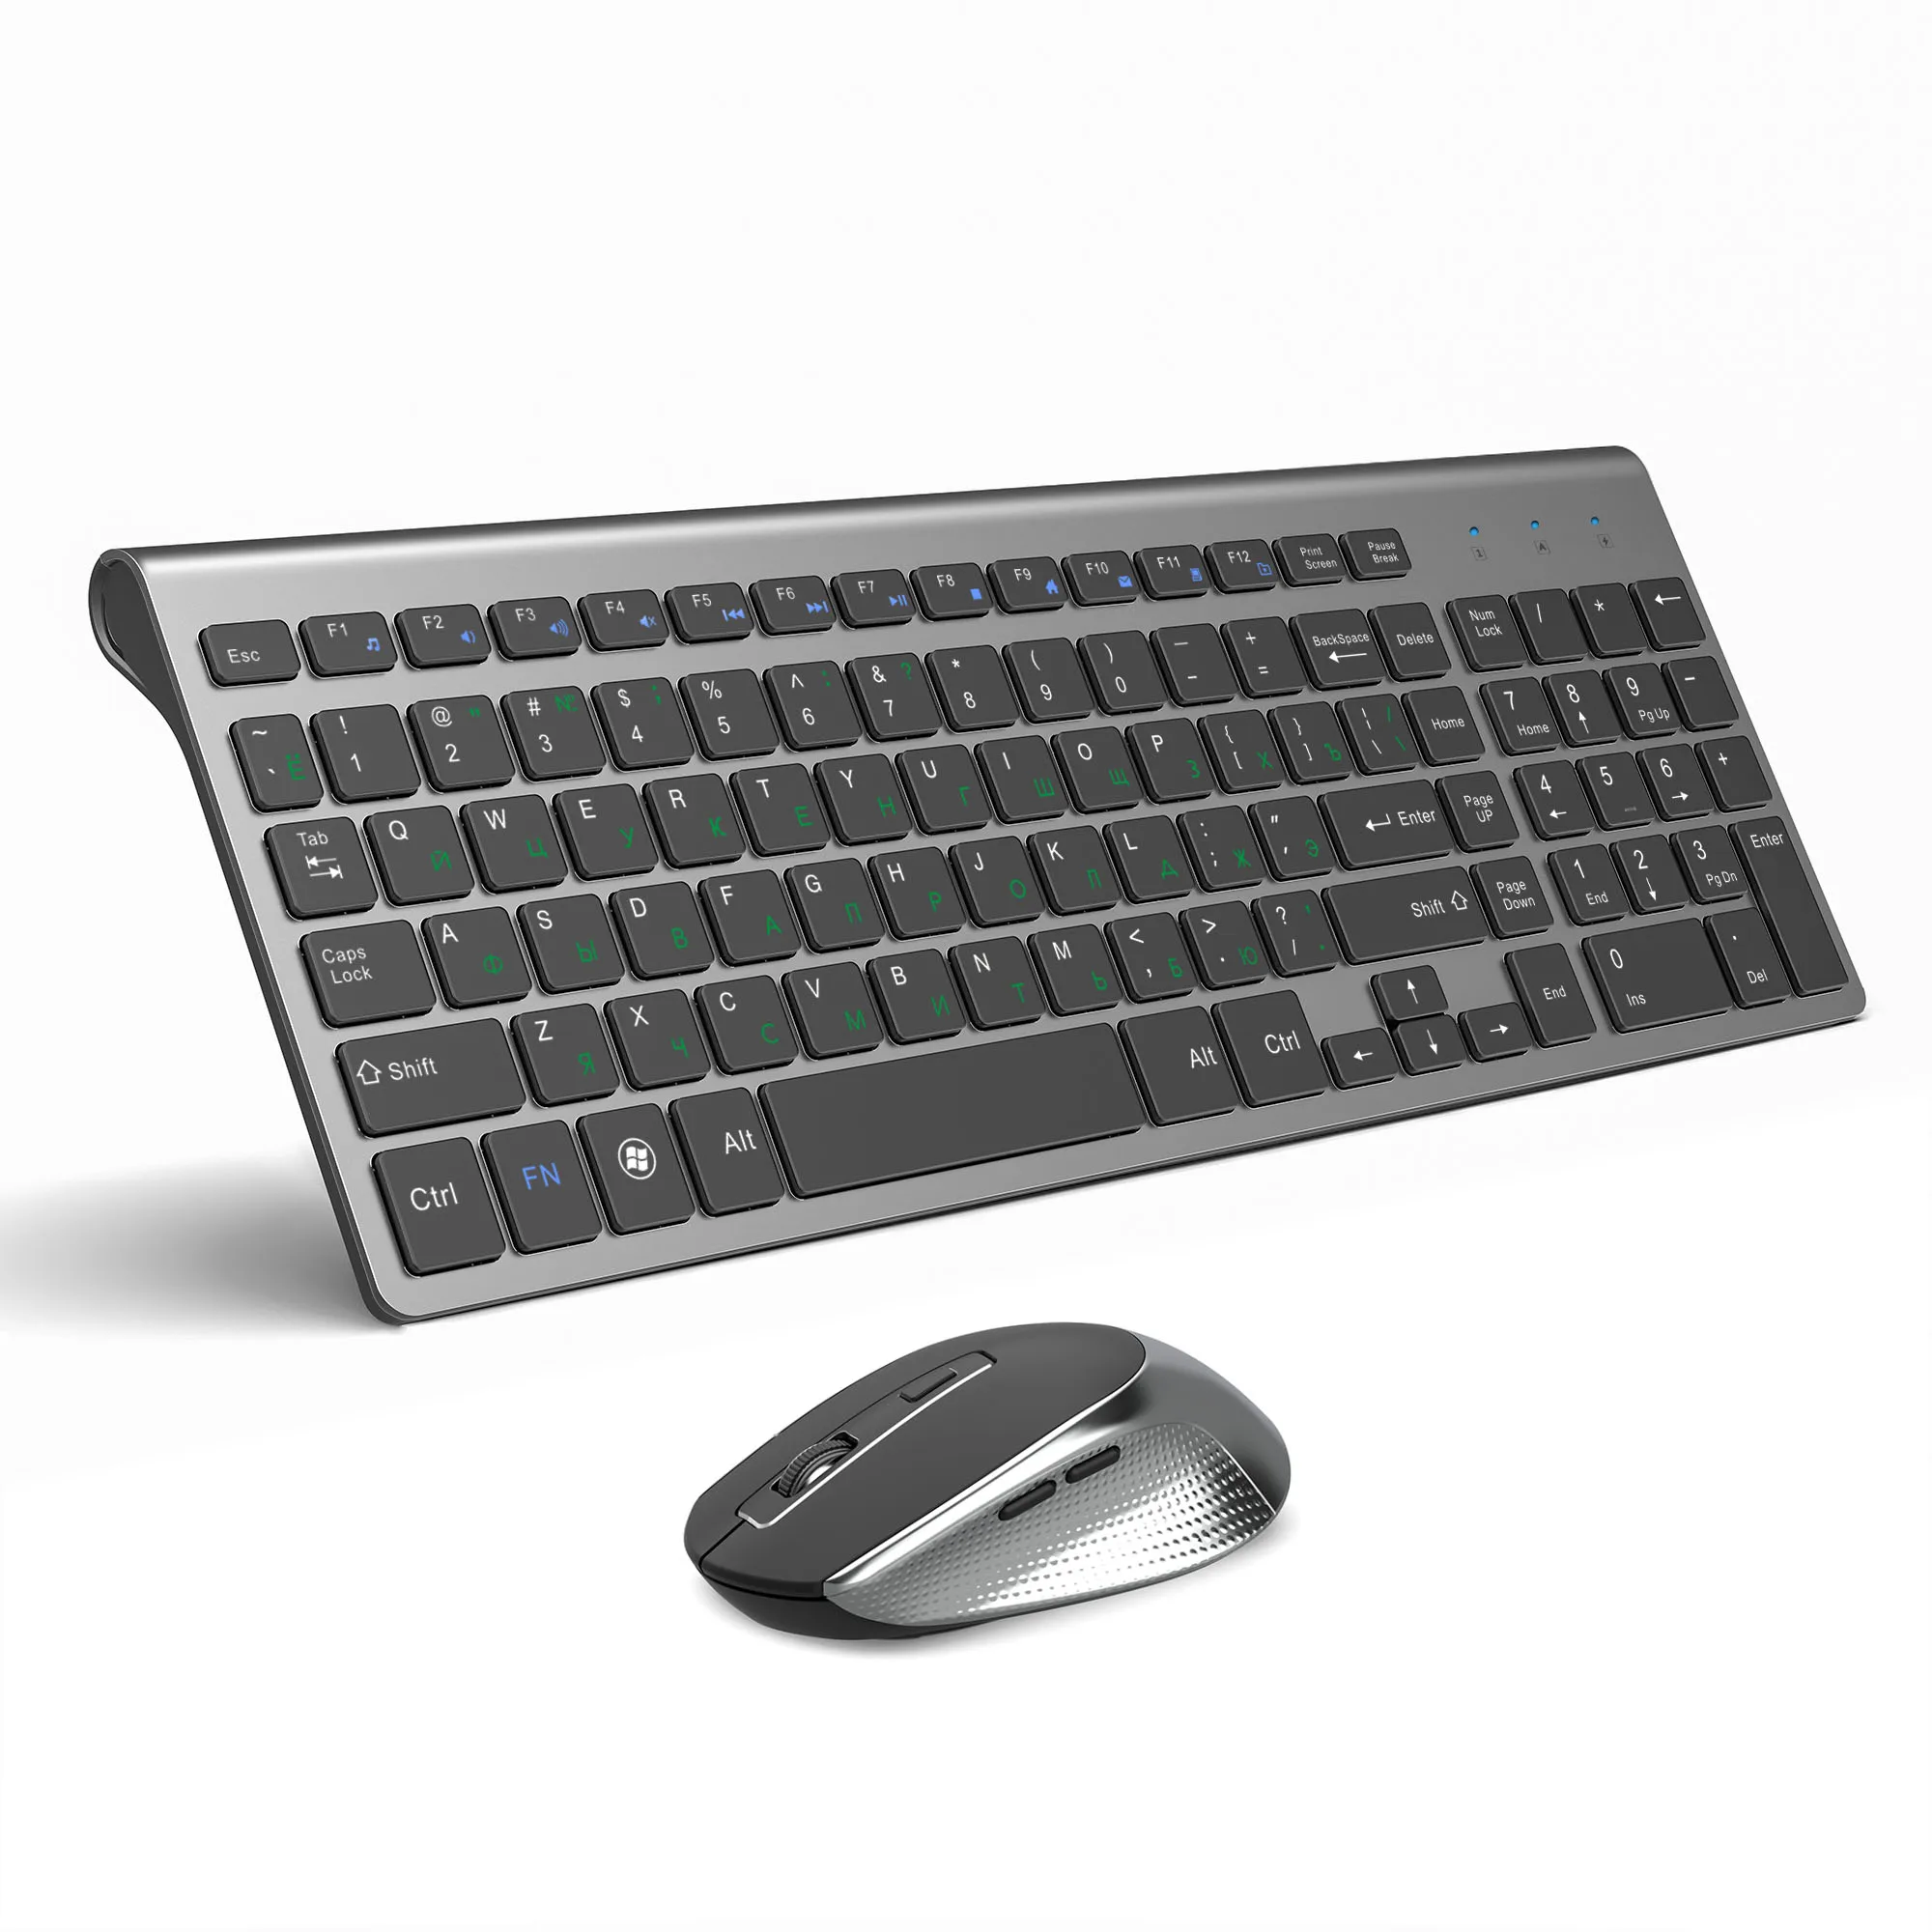 For JOYACCESS Russian Wireless Keyboard Mouse Set Ergonomic Mouse PC Mause Silent Button Keyboard and Mouse Combo 2.4G for